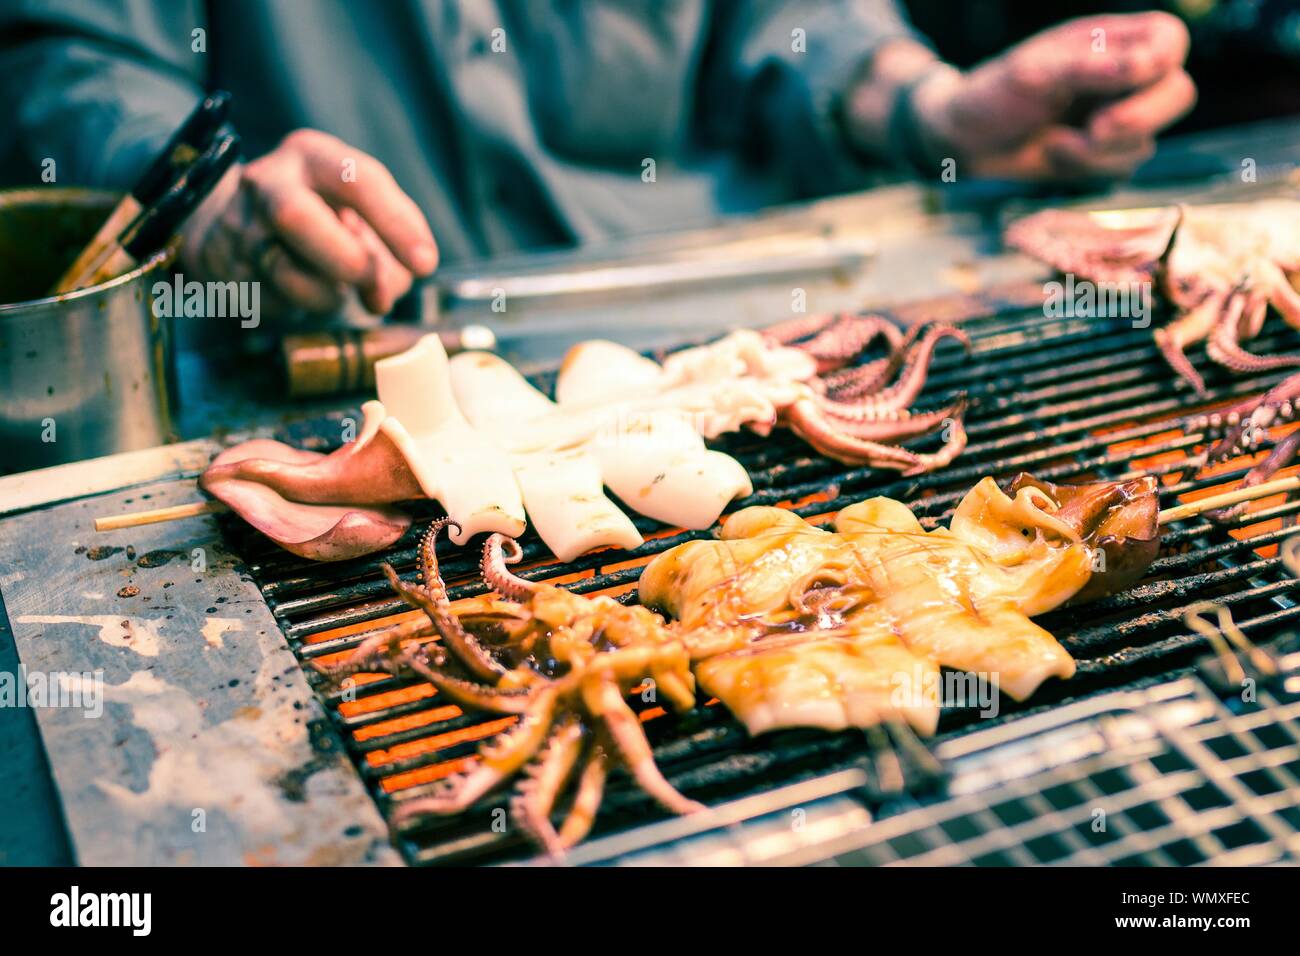 High Angle View Of Squids Being Gilled On Barbeque Stock Photo